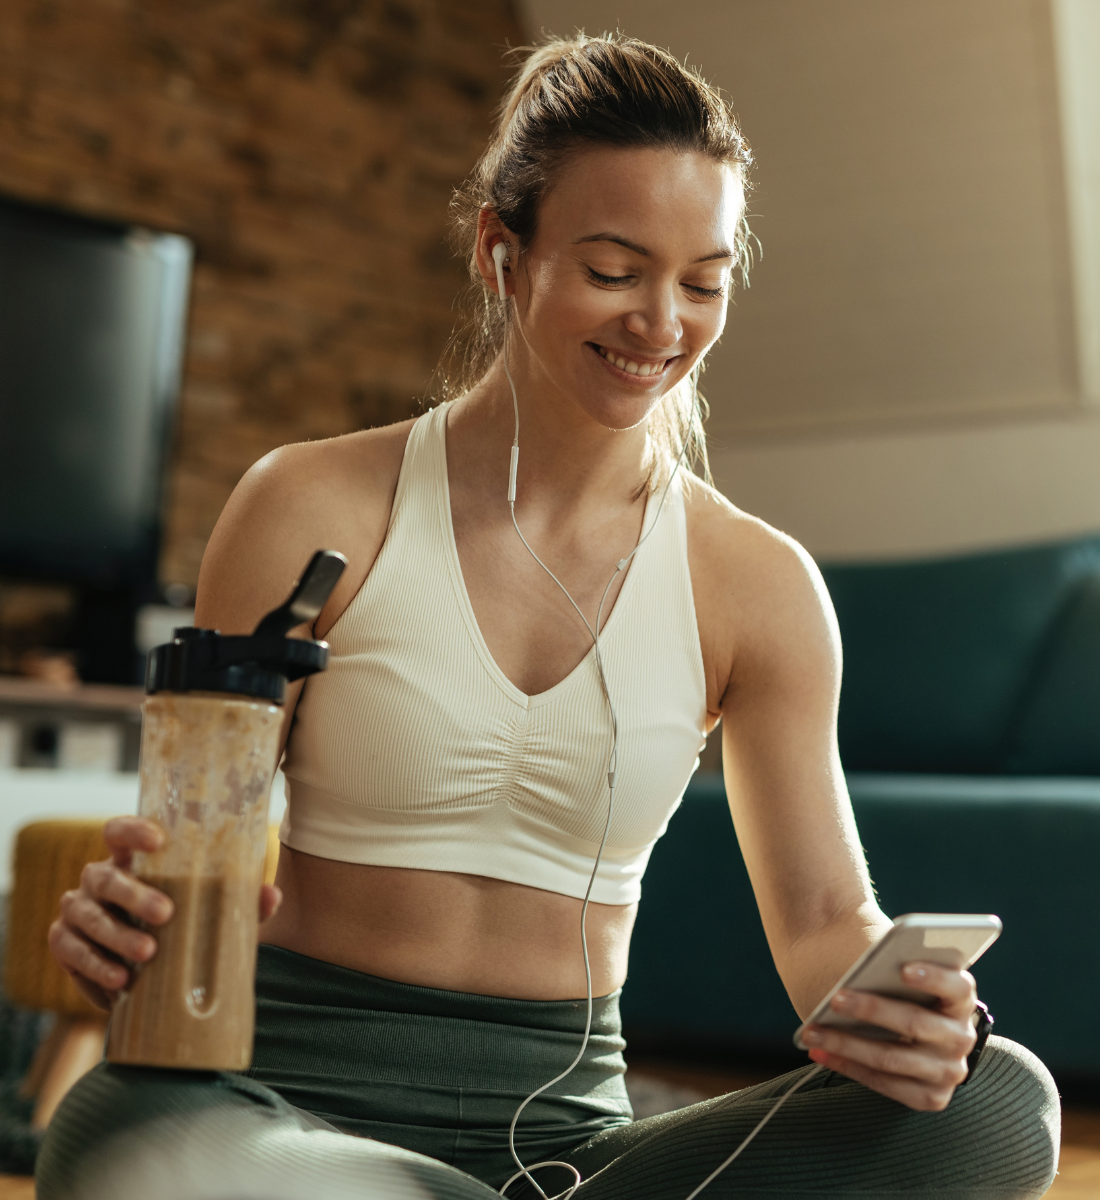  A young woman in workout clothes enjoys a smoothie just before doing a workout in her living room.